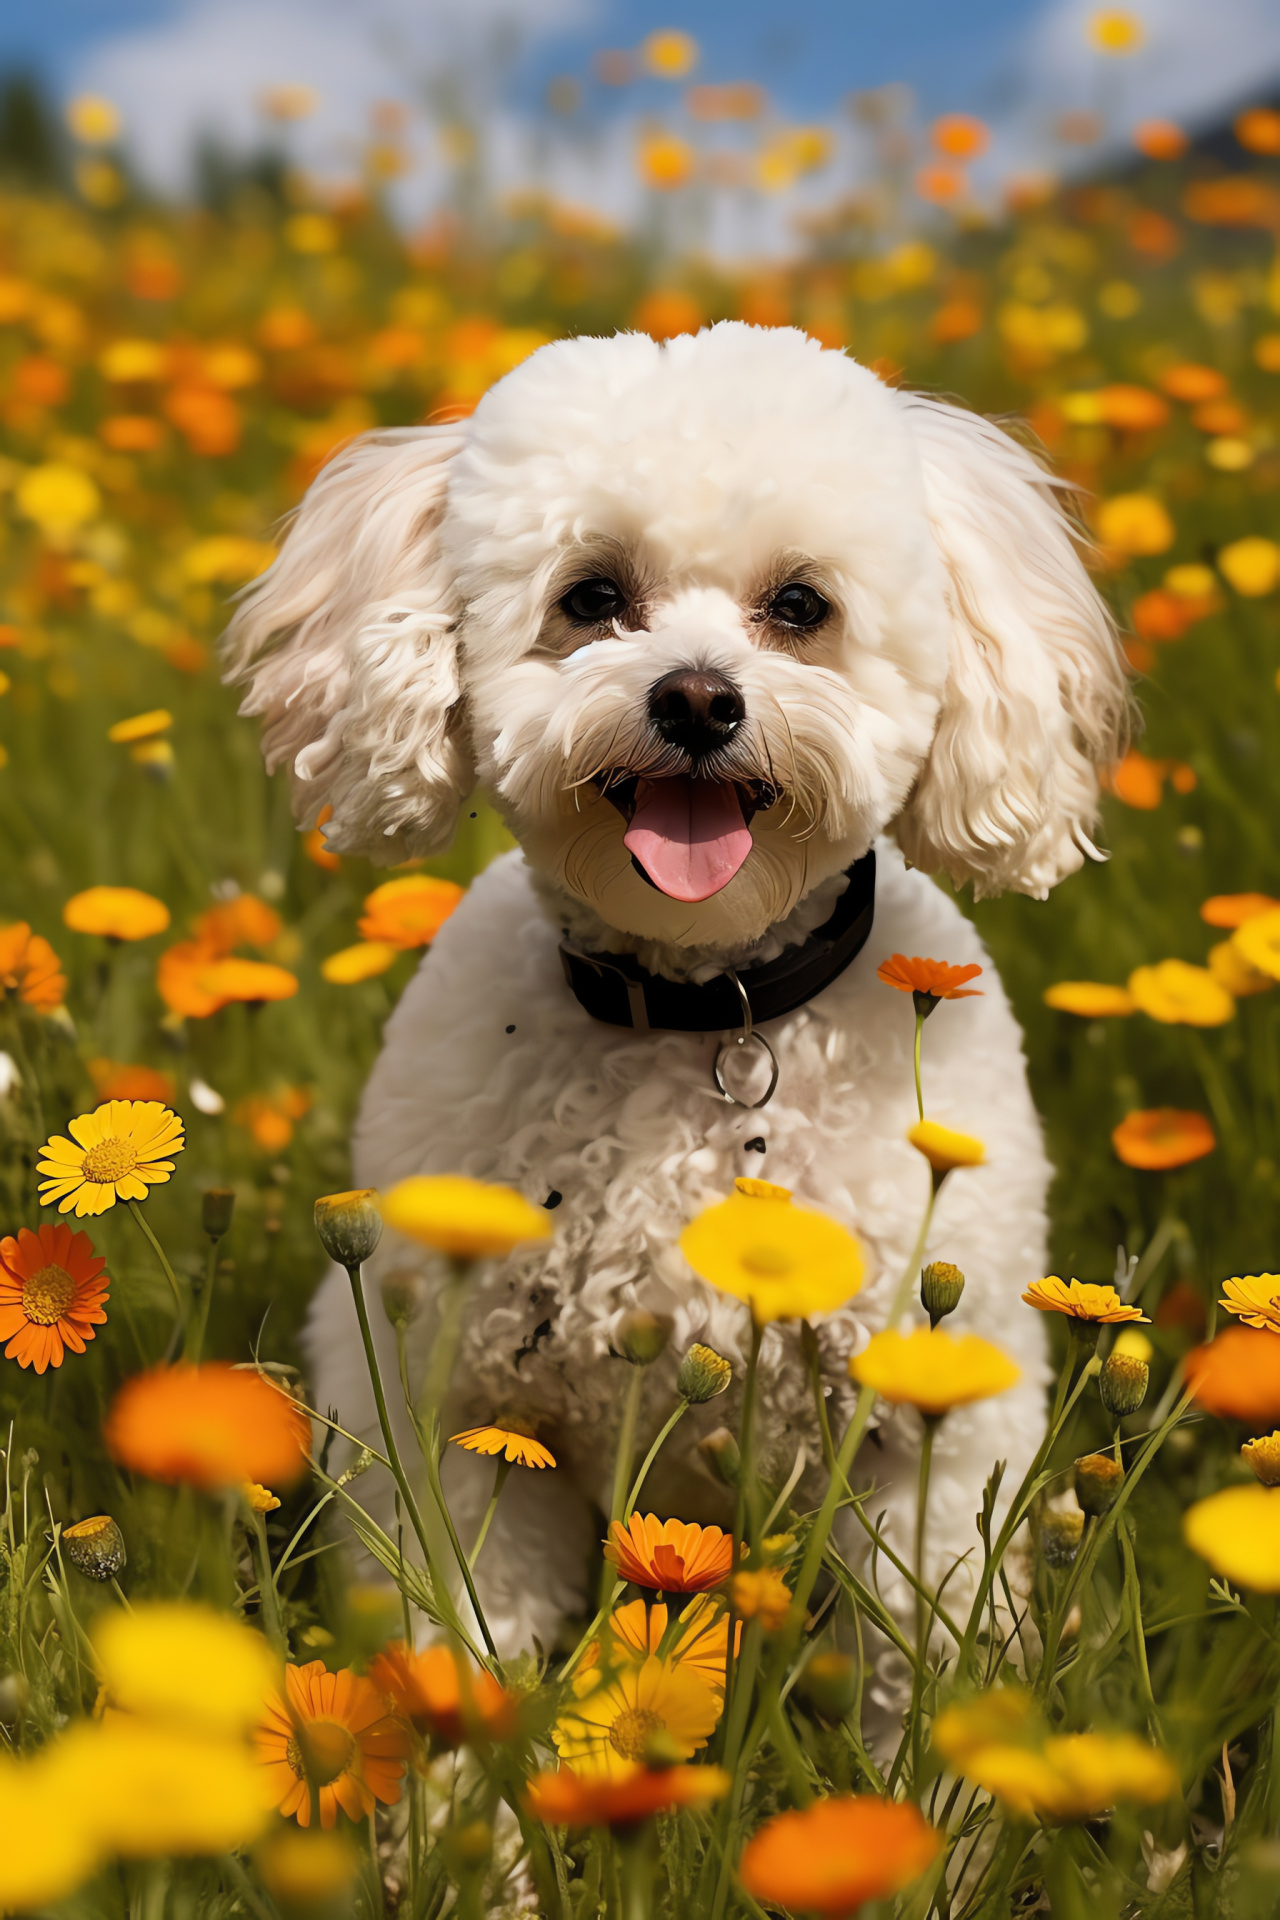 Miniature Poodle, parti-colored fur, outdoor canine, pet in wildflowers, expressive gaze, HD Phone Wallpaper